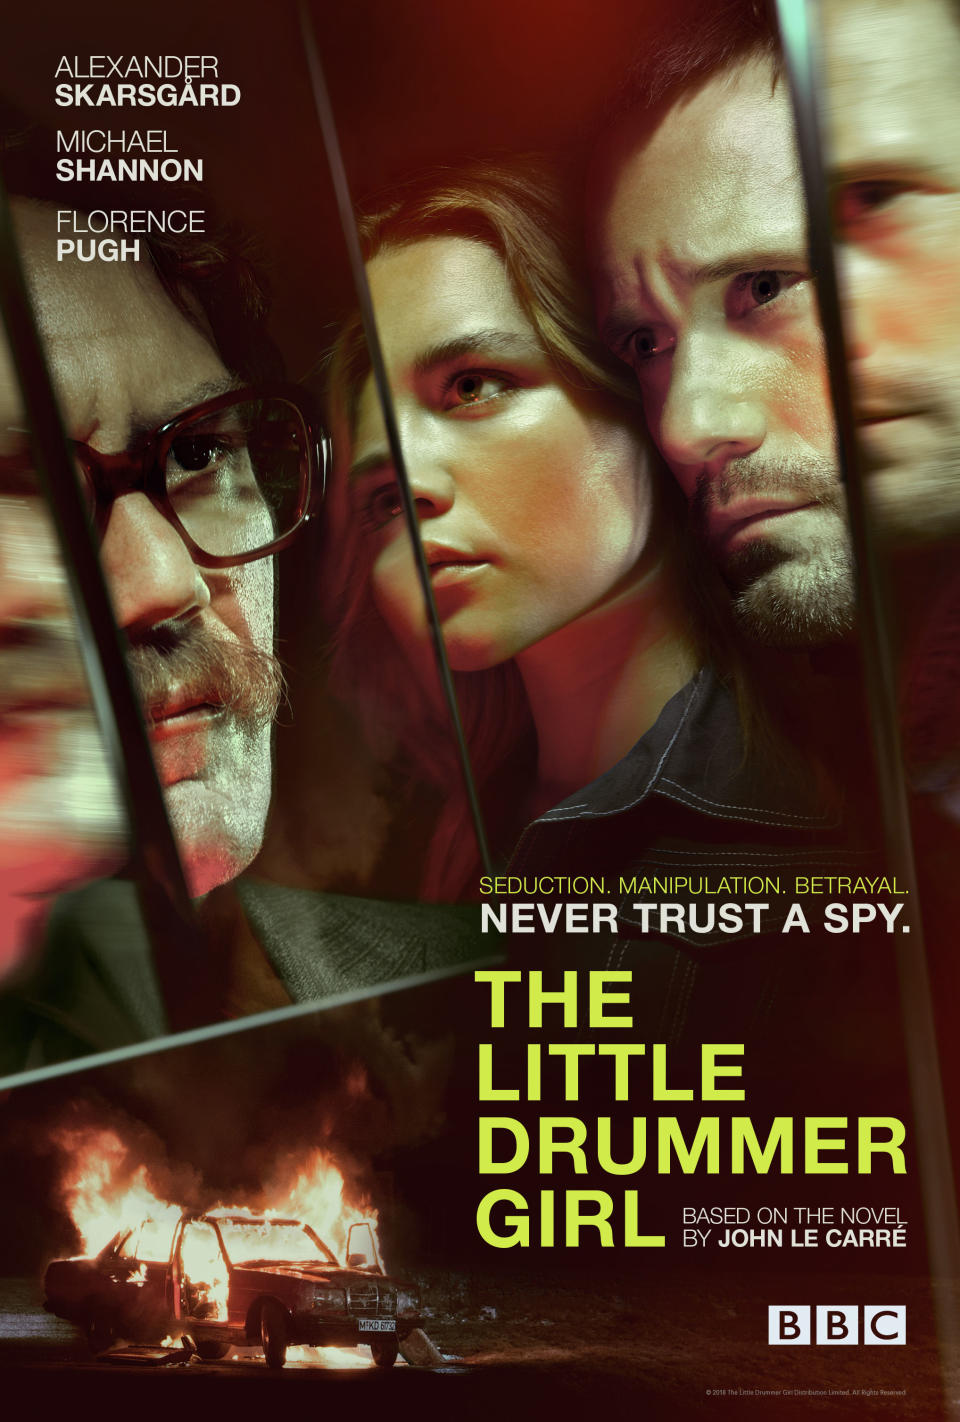 MICHAEL SHANNON as Kurtz, FLORENCE PUGH as Charlie and AELXANDER SKARSGARD as Becker. (© 2018 The Little Drummer Girl Distribution Limited. All rights reserved.)